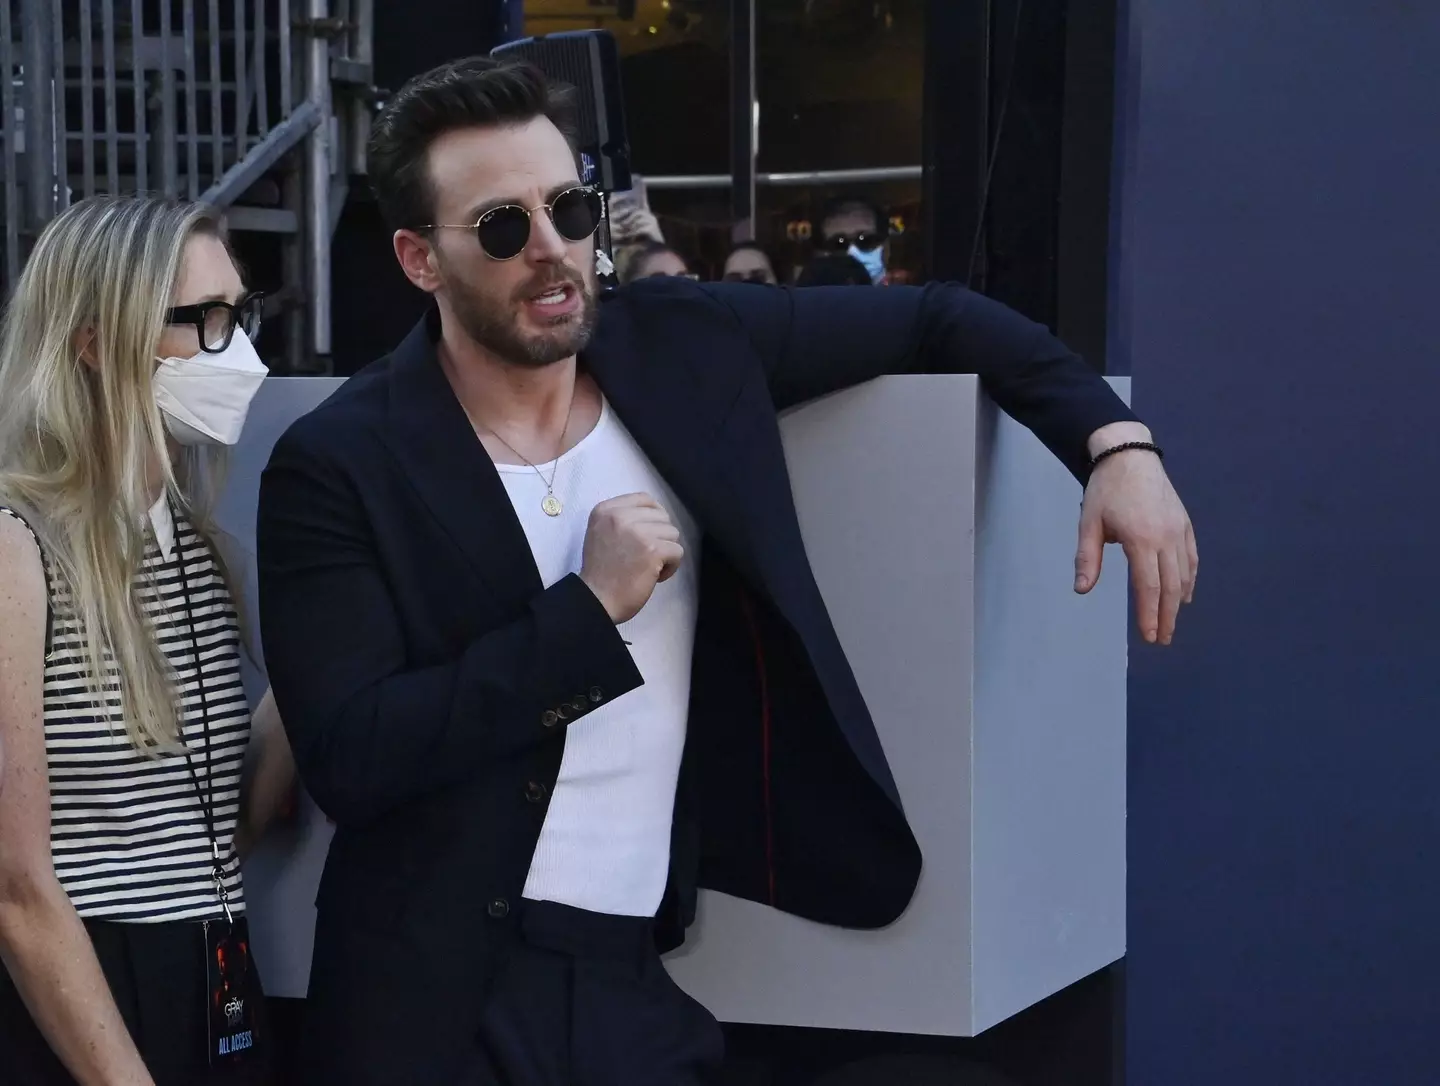 It's this Chris Evans we're talking about, of course.